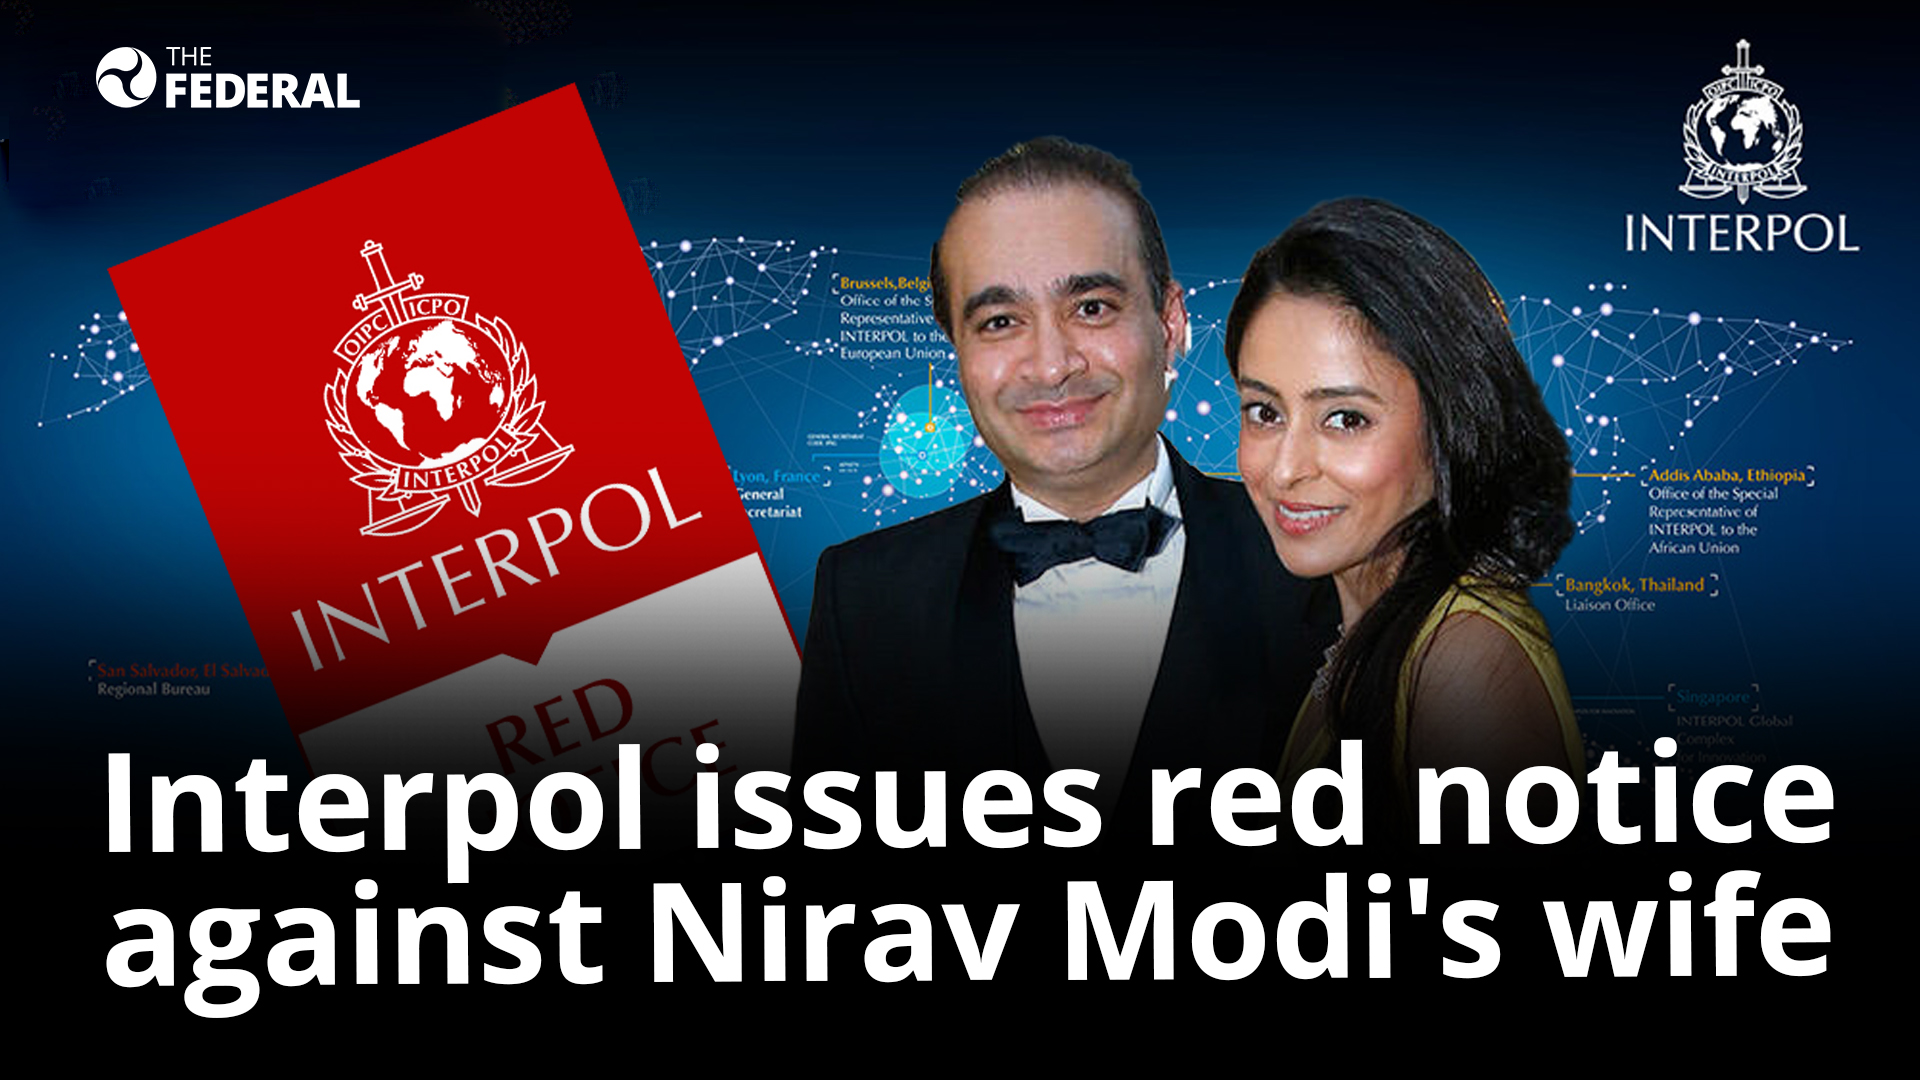 Explained: What is Interpol red notice and why is it issued